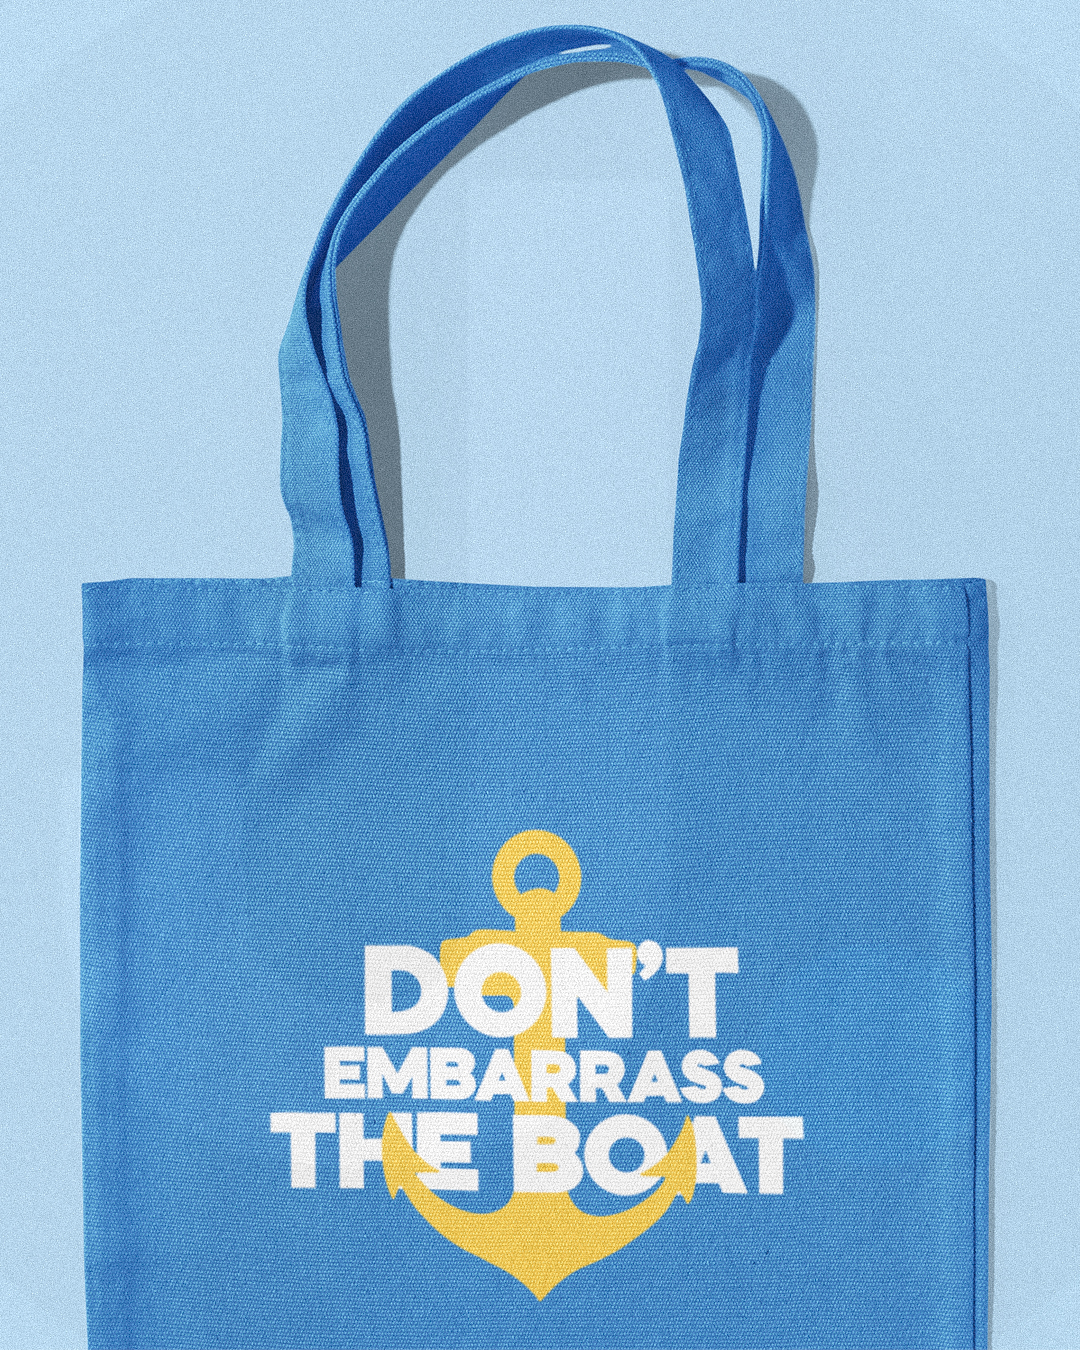 Don't Embarrass The Boat Tote Bag - Captain Below Deck Inspired Tote Bag - Don't Embarrass The Boat Below Deck Inspired Tote Bag